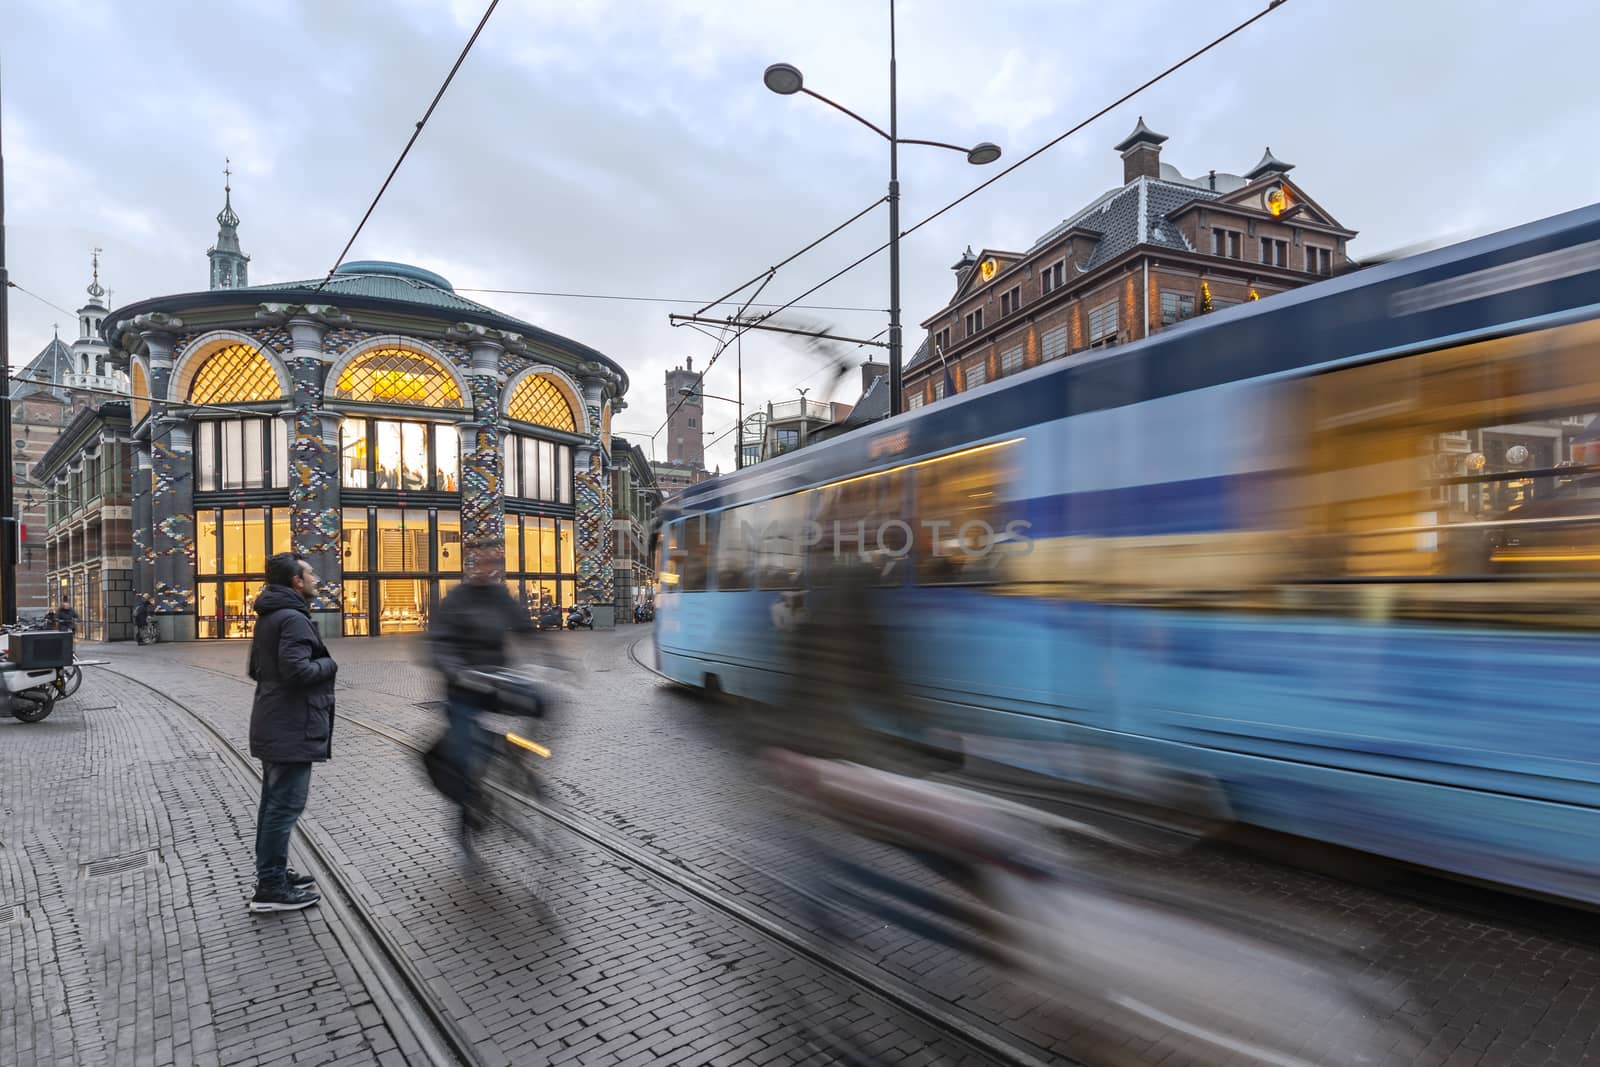 Fast tram and cyclist in The Hague, Netherlands